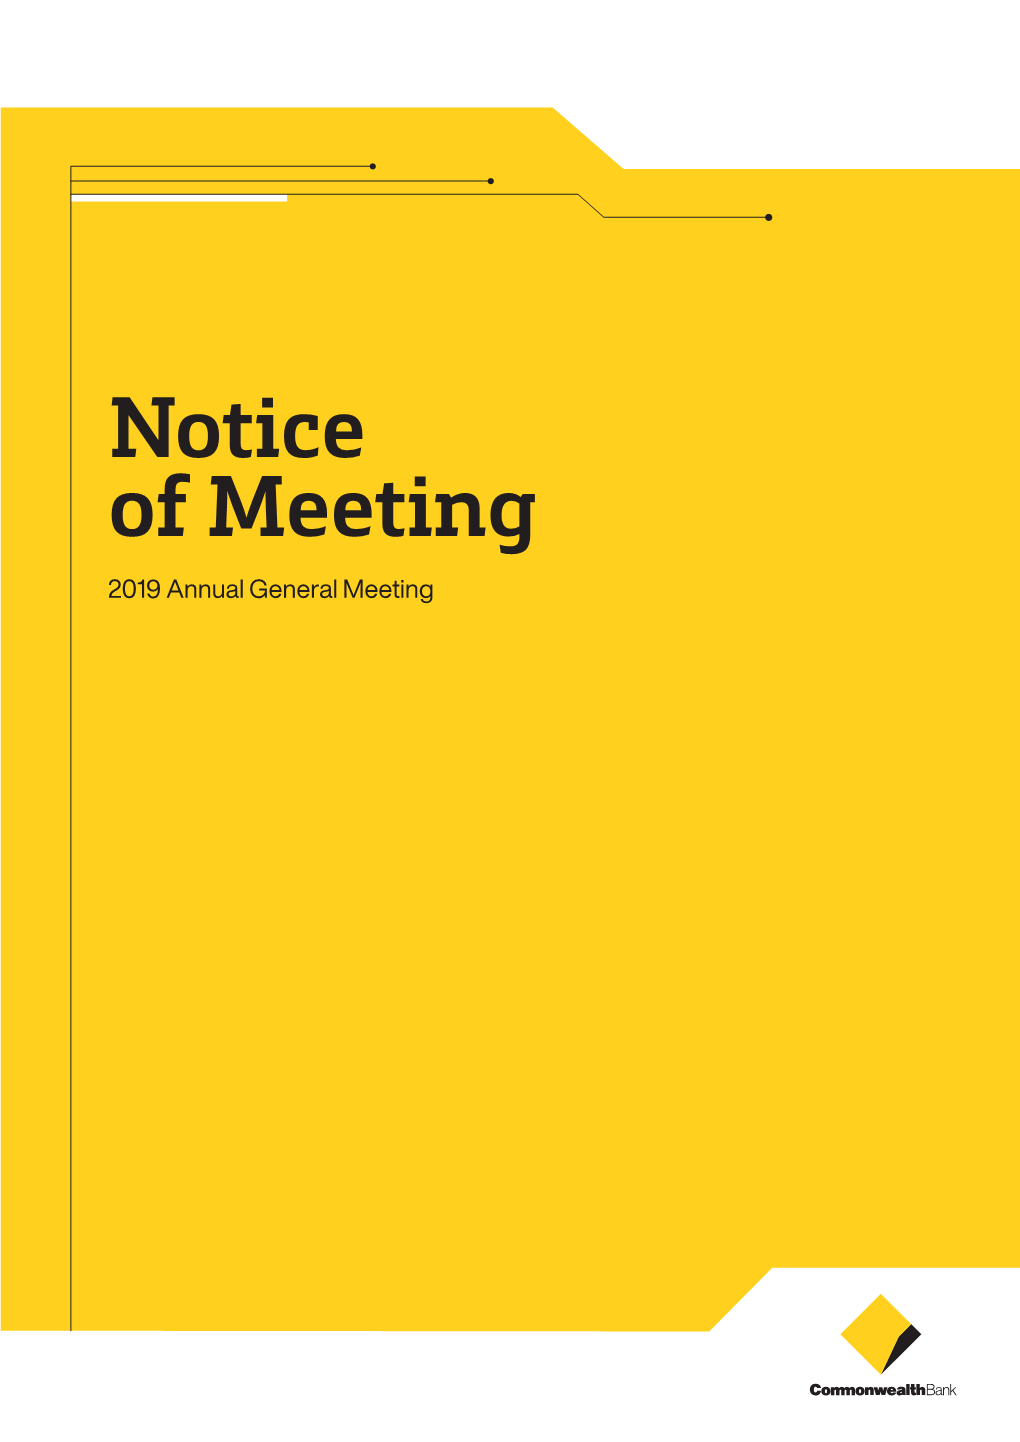 Notice of Meeting 2019 Annual General Meeting Contents